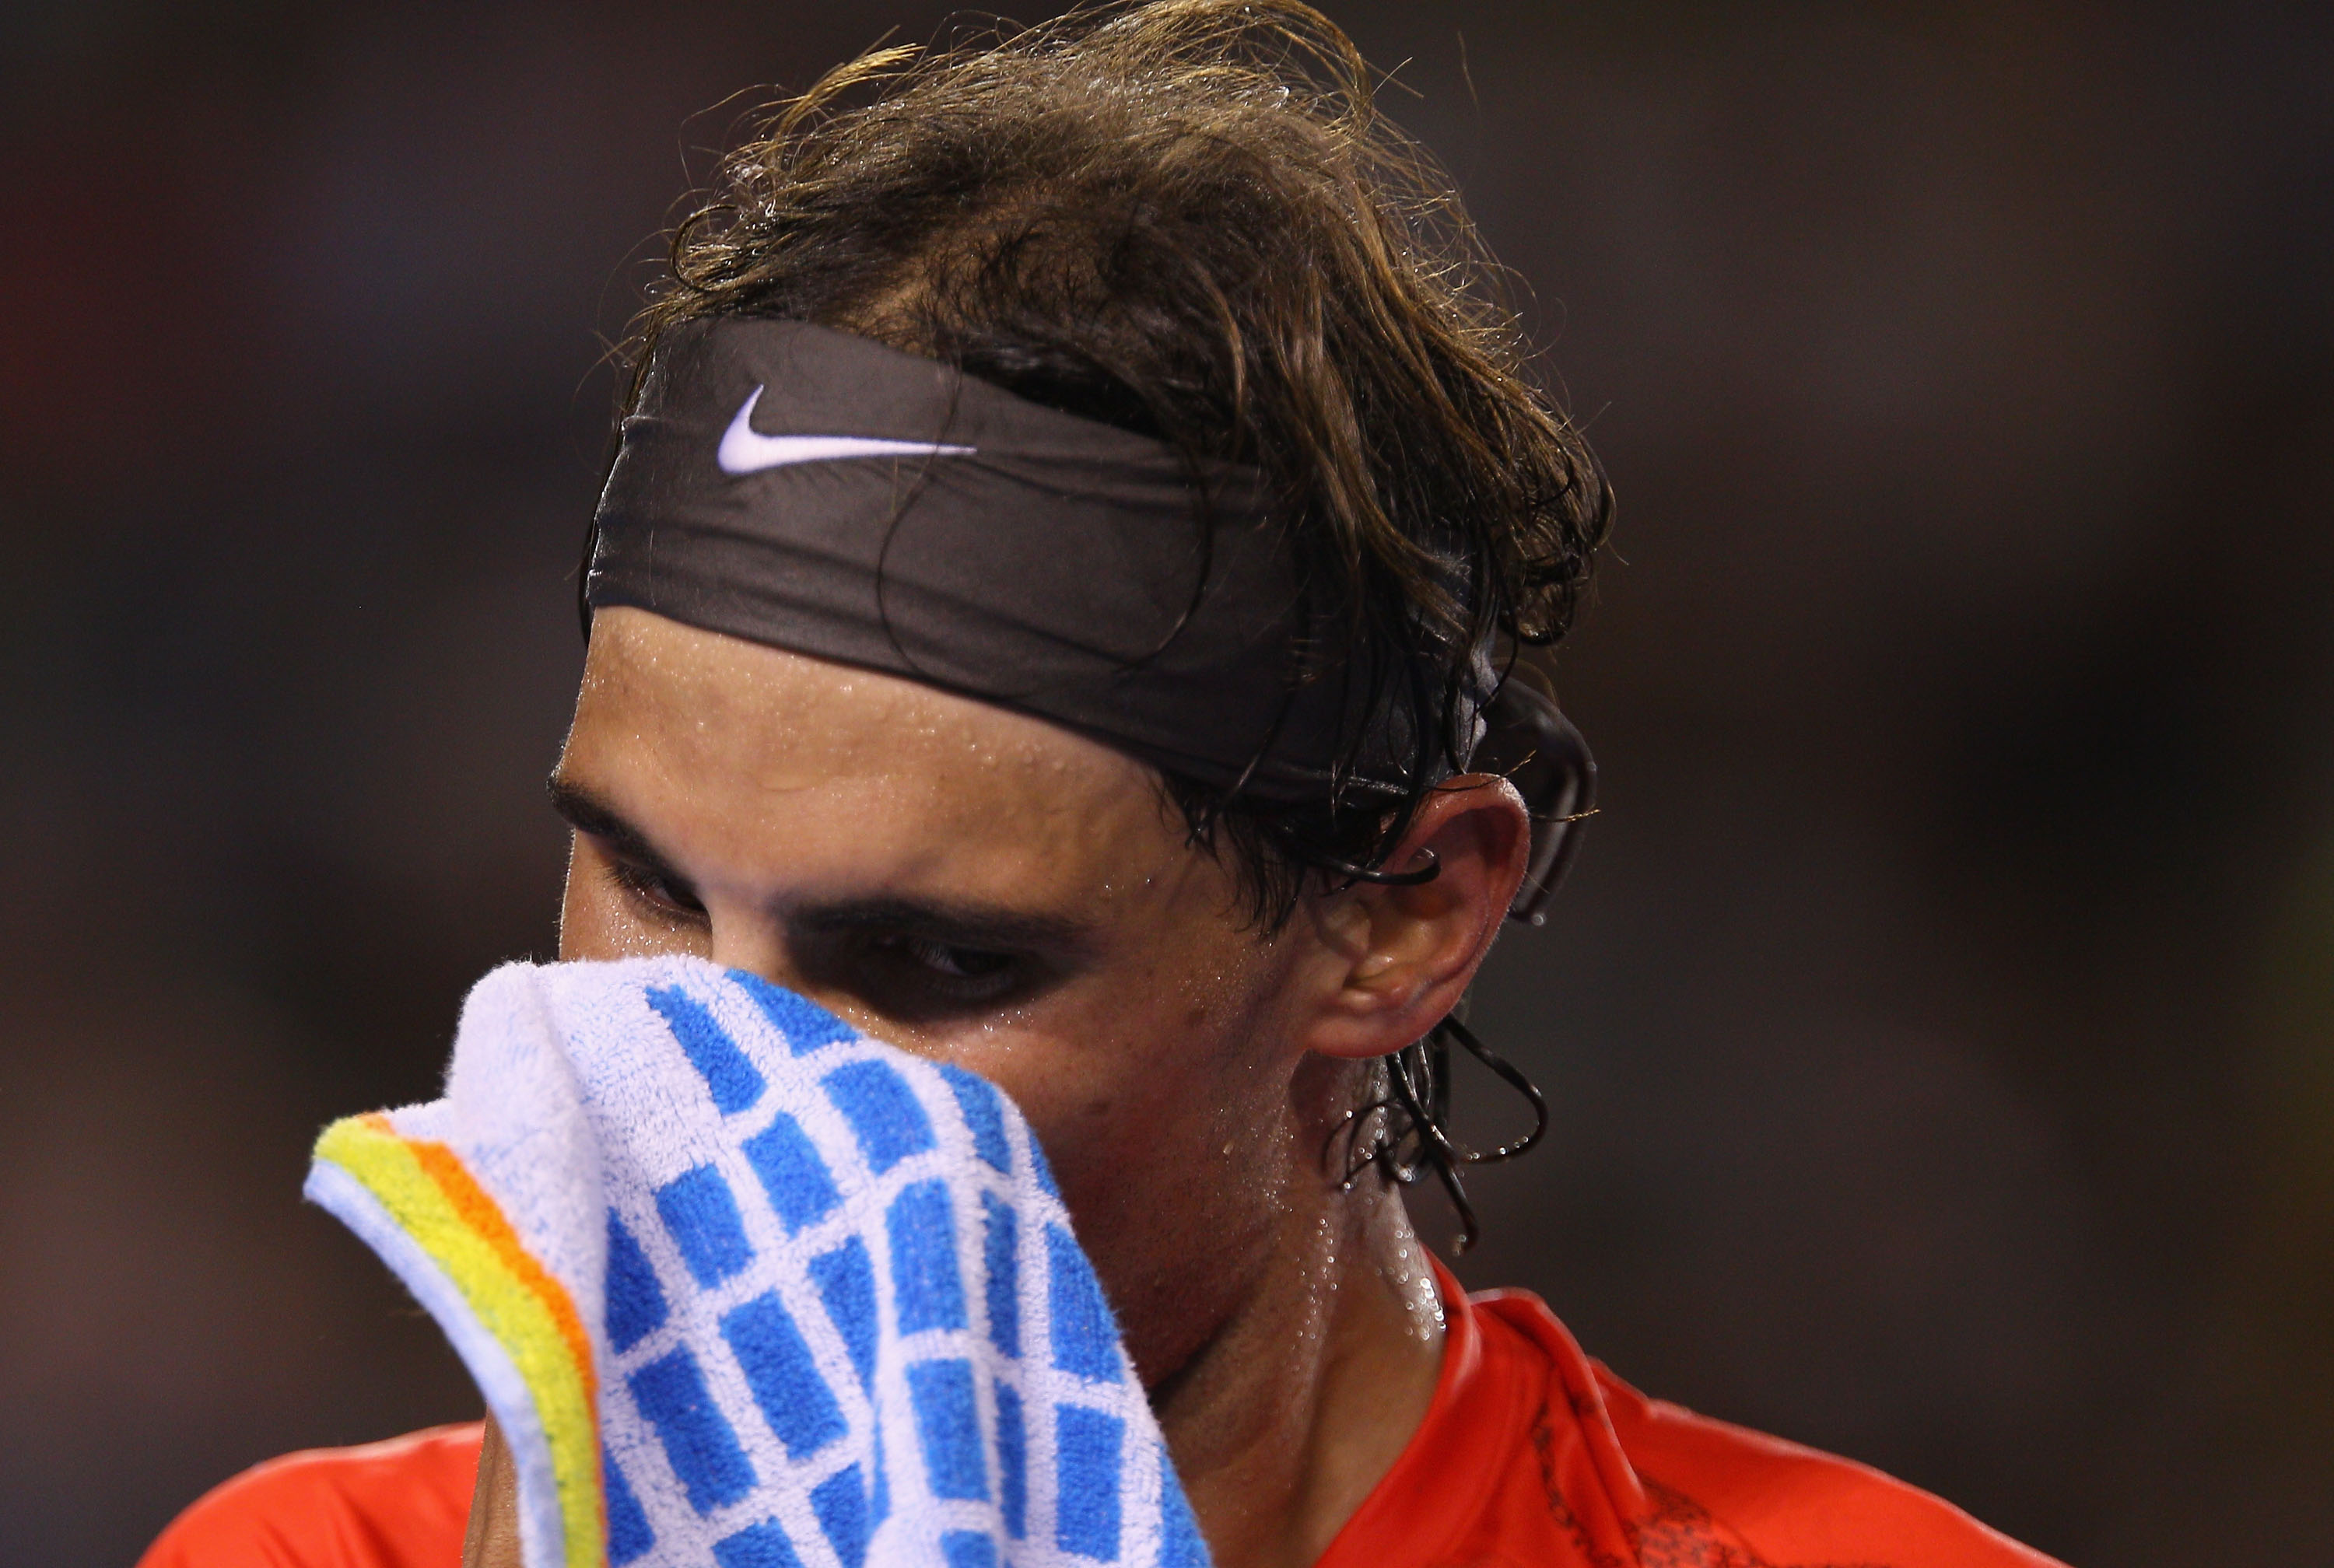 MELBOURNE, AUSTRALIA - JANUARY 22:  Rafael Nadal of Spain towels down between games in his third round match against Bernard Tomic of Australia during day six of the 2011 Australian Open at Melbourne Park on January 22, 2011 in Melbourne, Australia.  (Pho